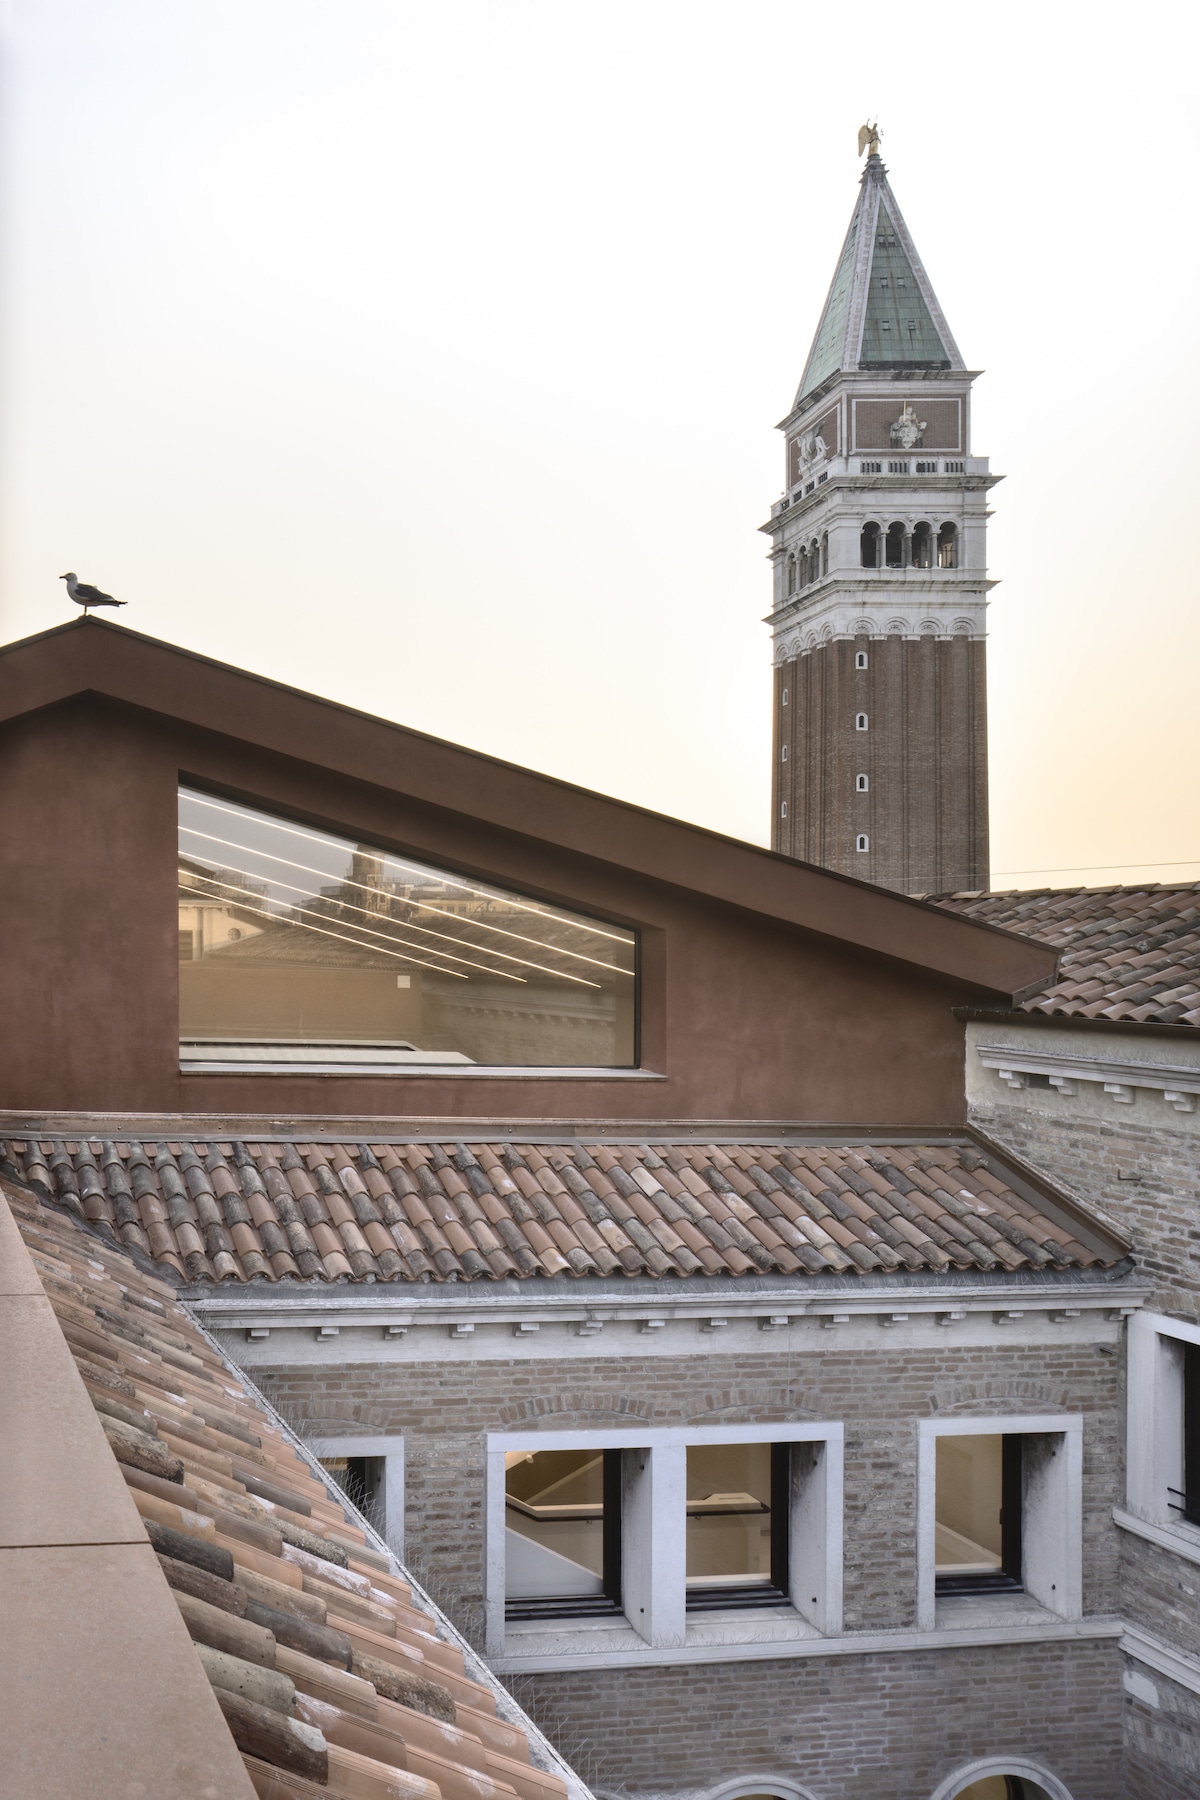 Roof by David Chipperfield Architects at the Procuratie Vecchie in Venice